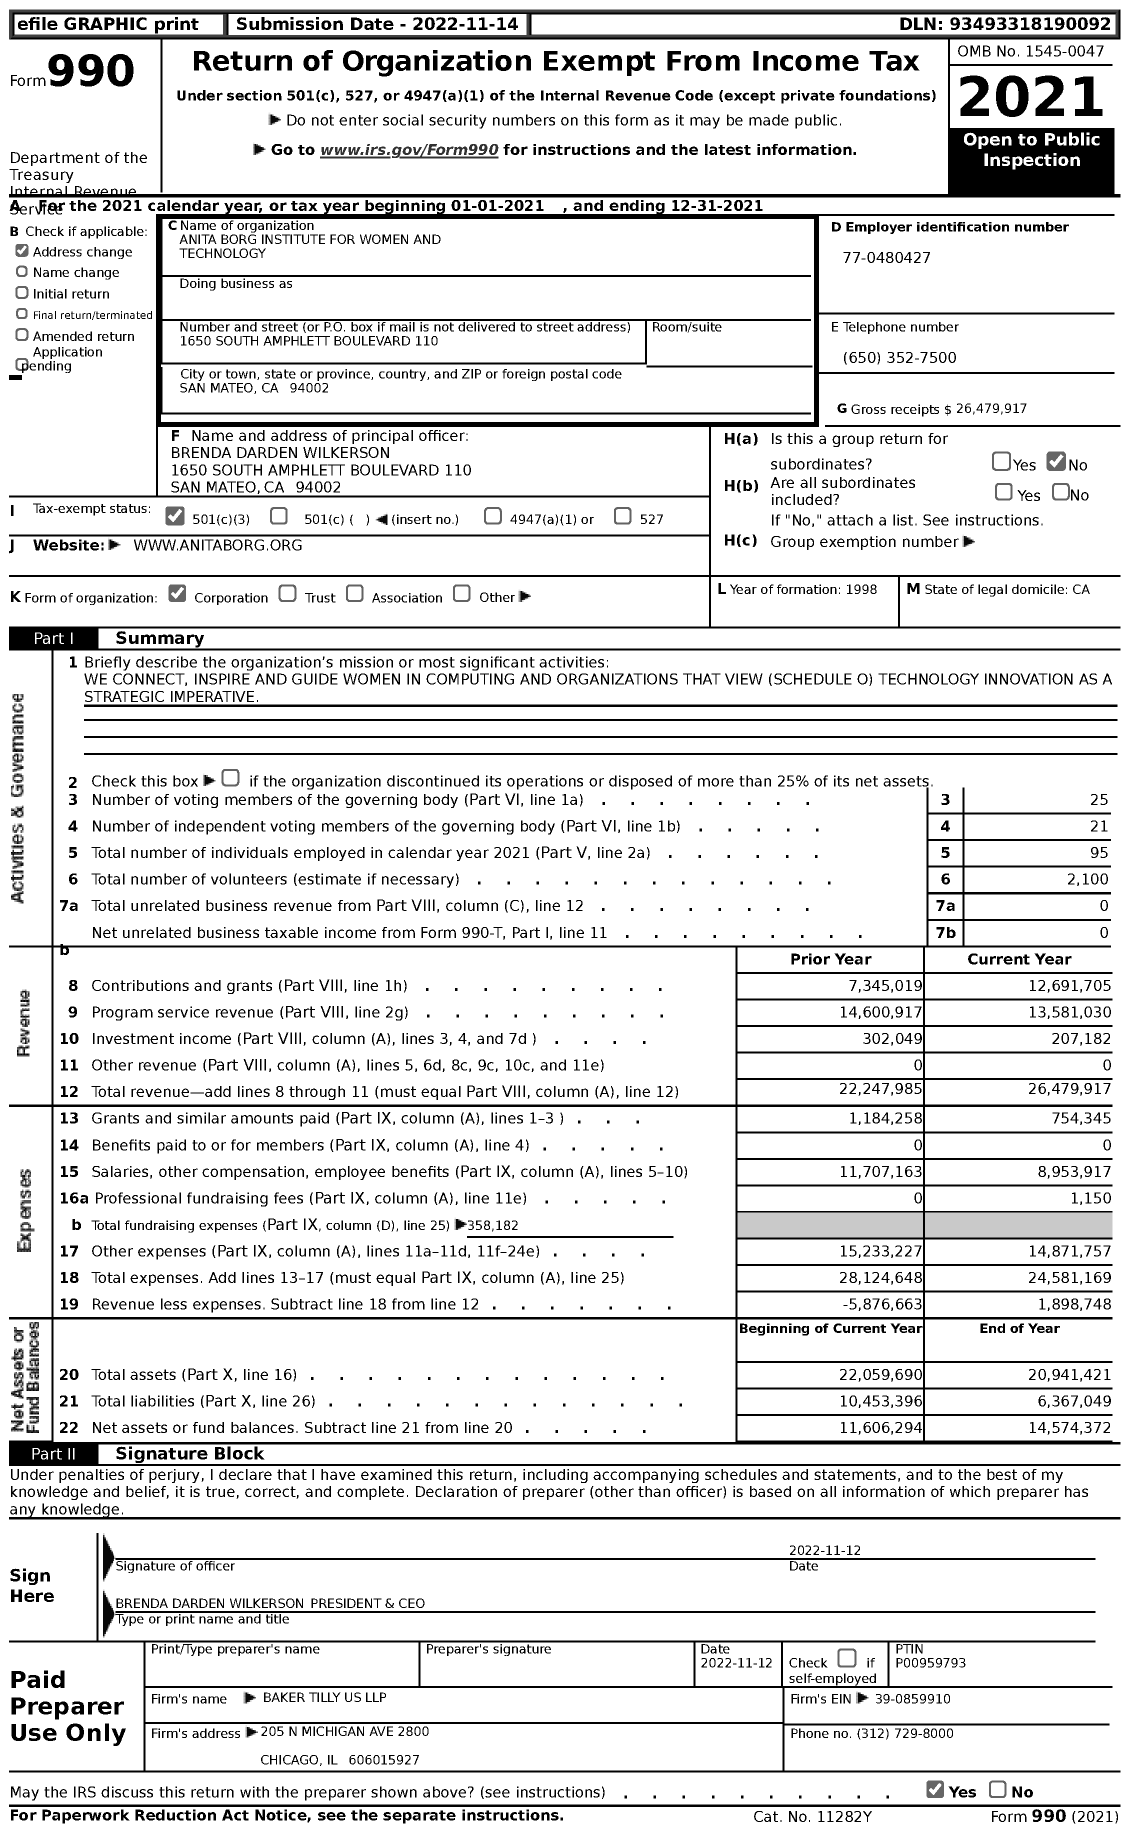 Image of first page of 2021 Form 990 for Anita Borg Institute for Women and Technology